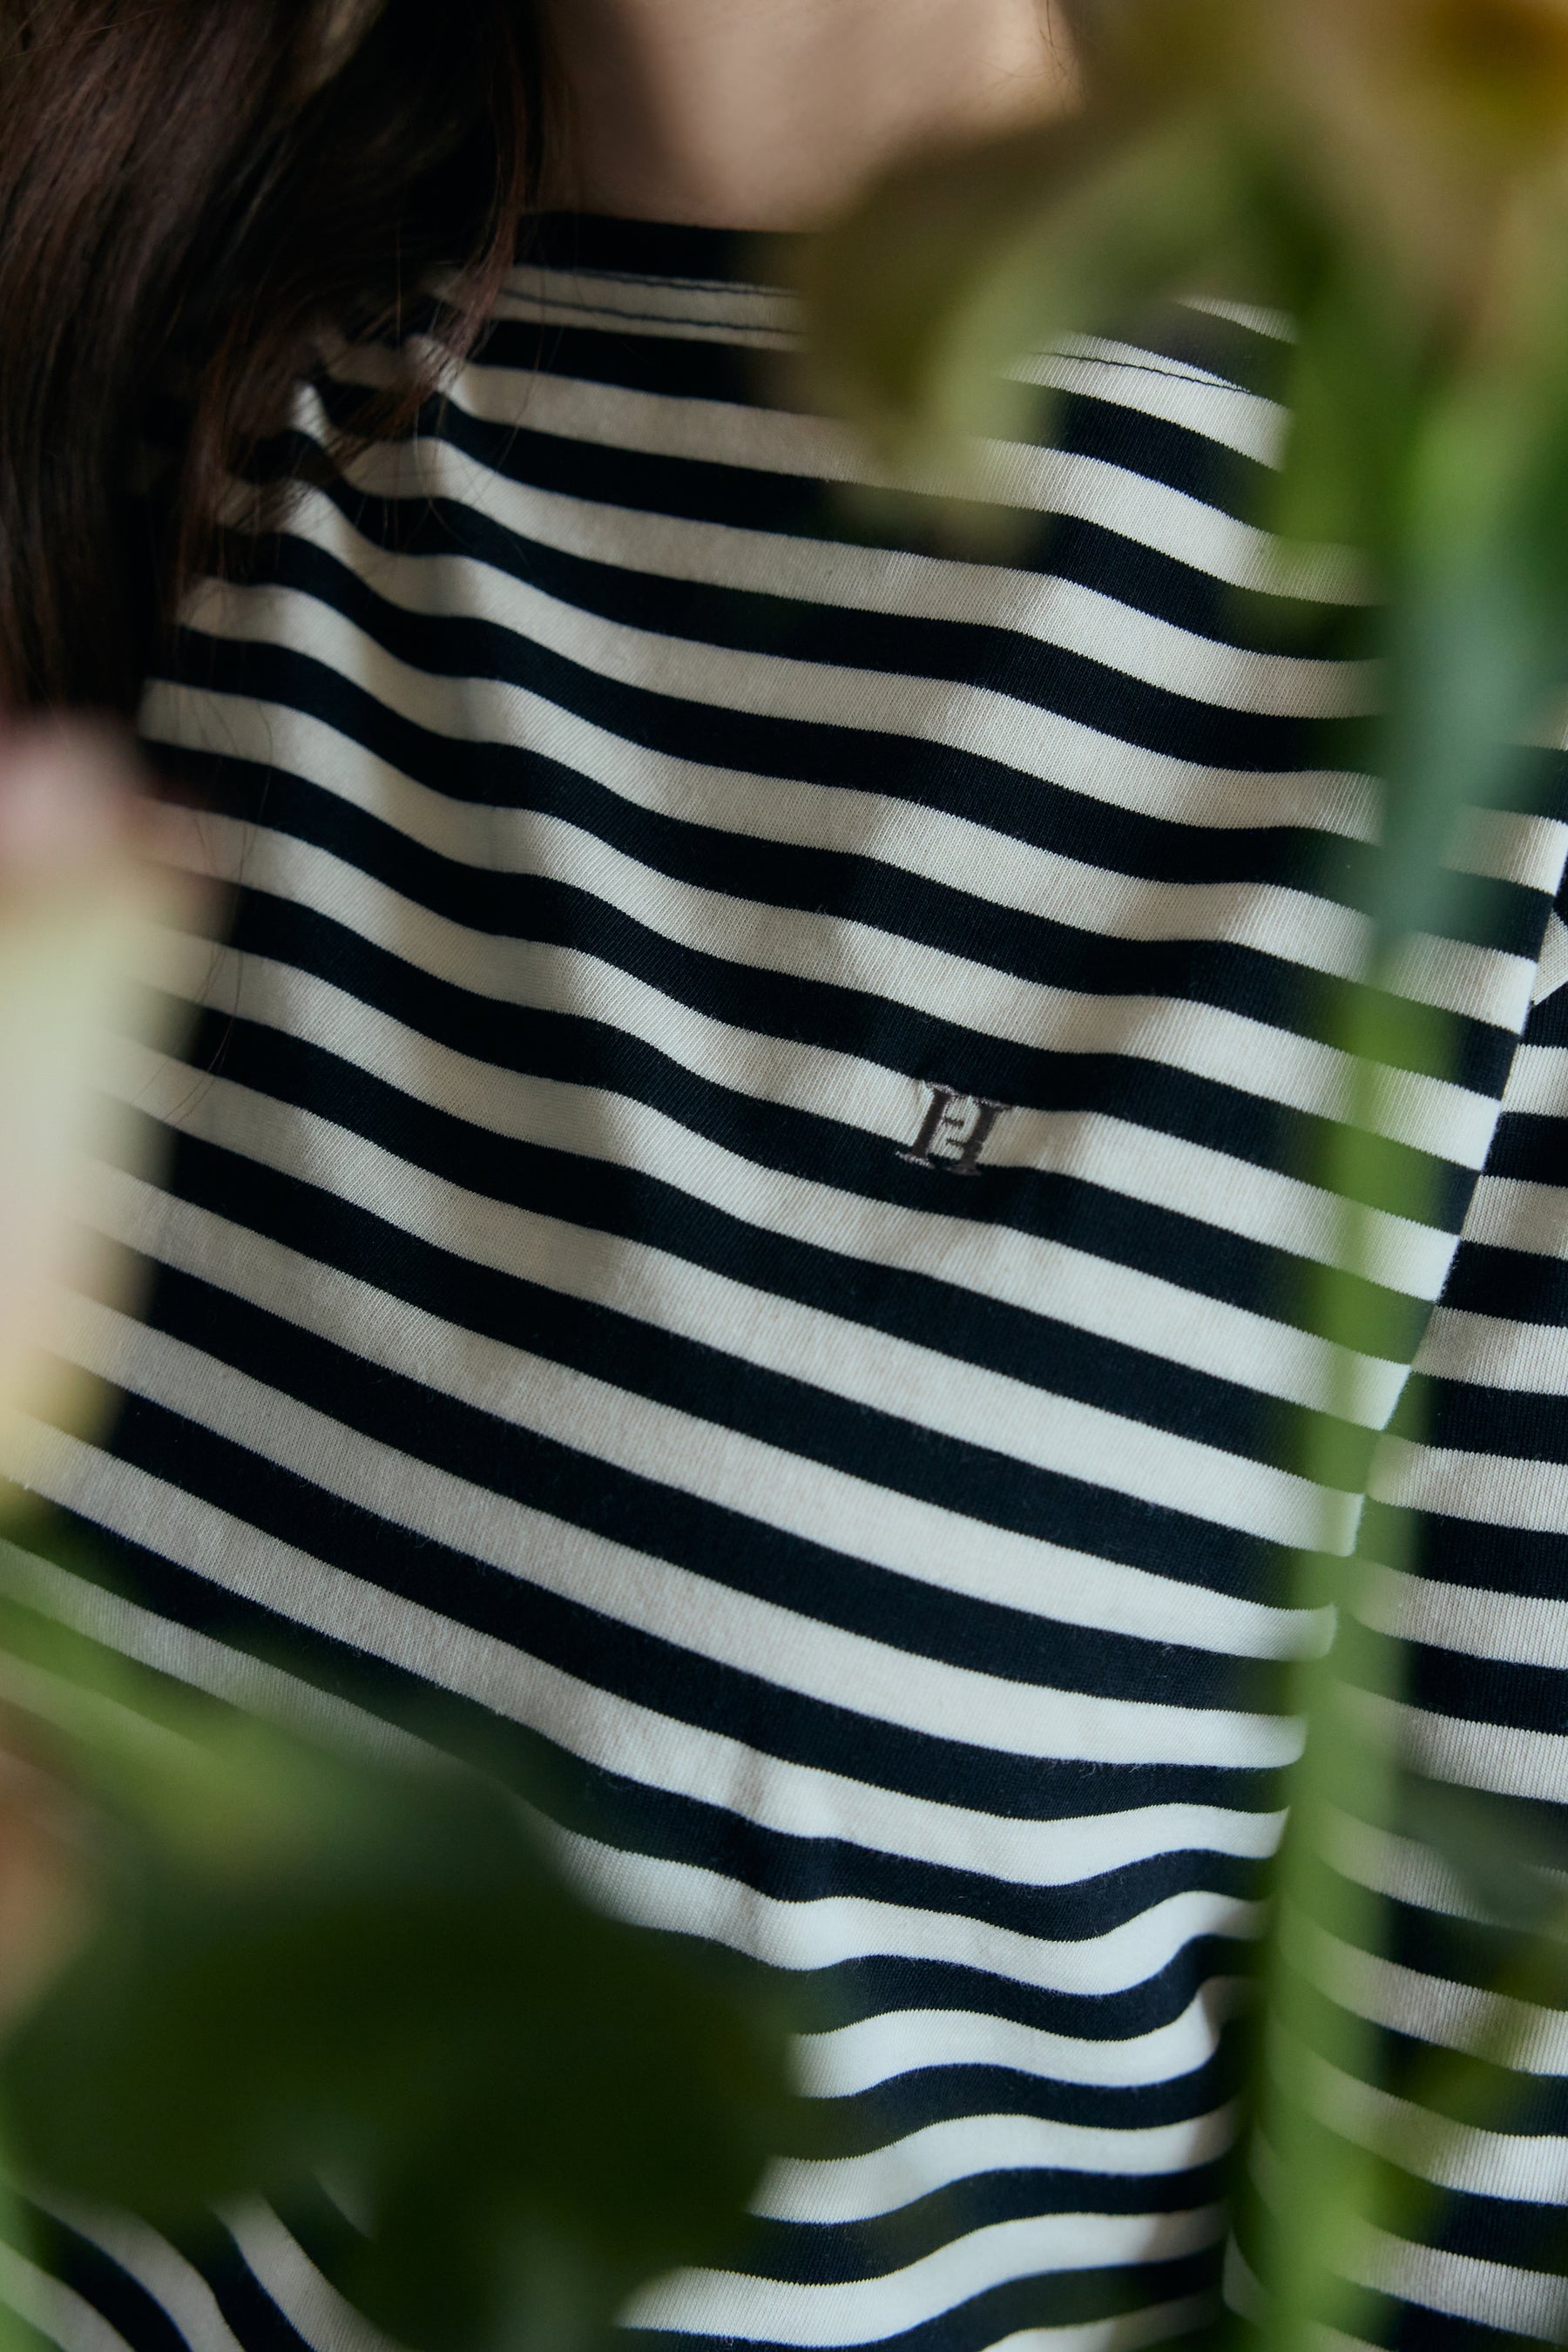 Her lip to ♡ French Striped Top